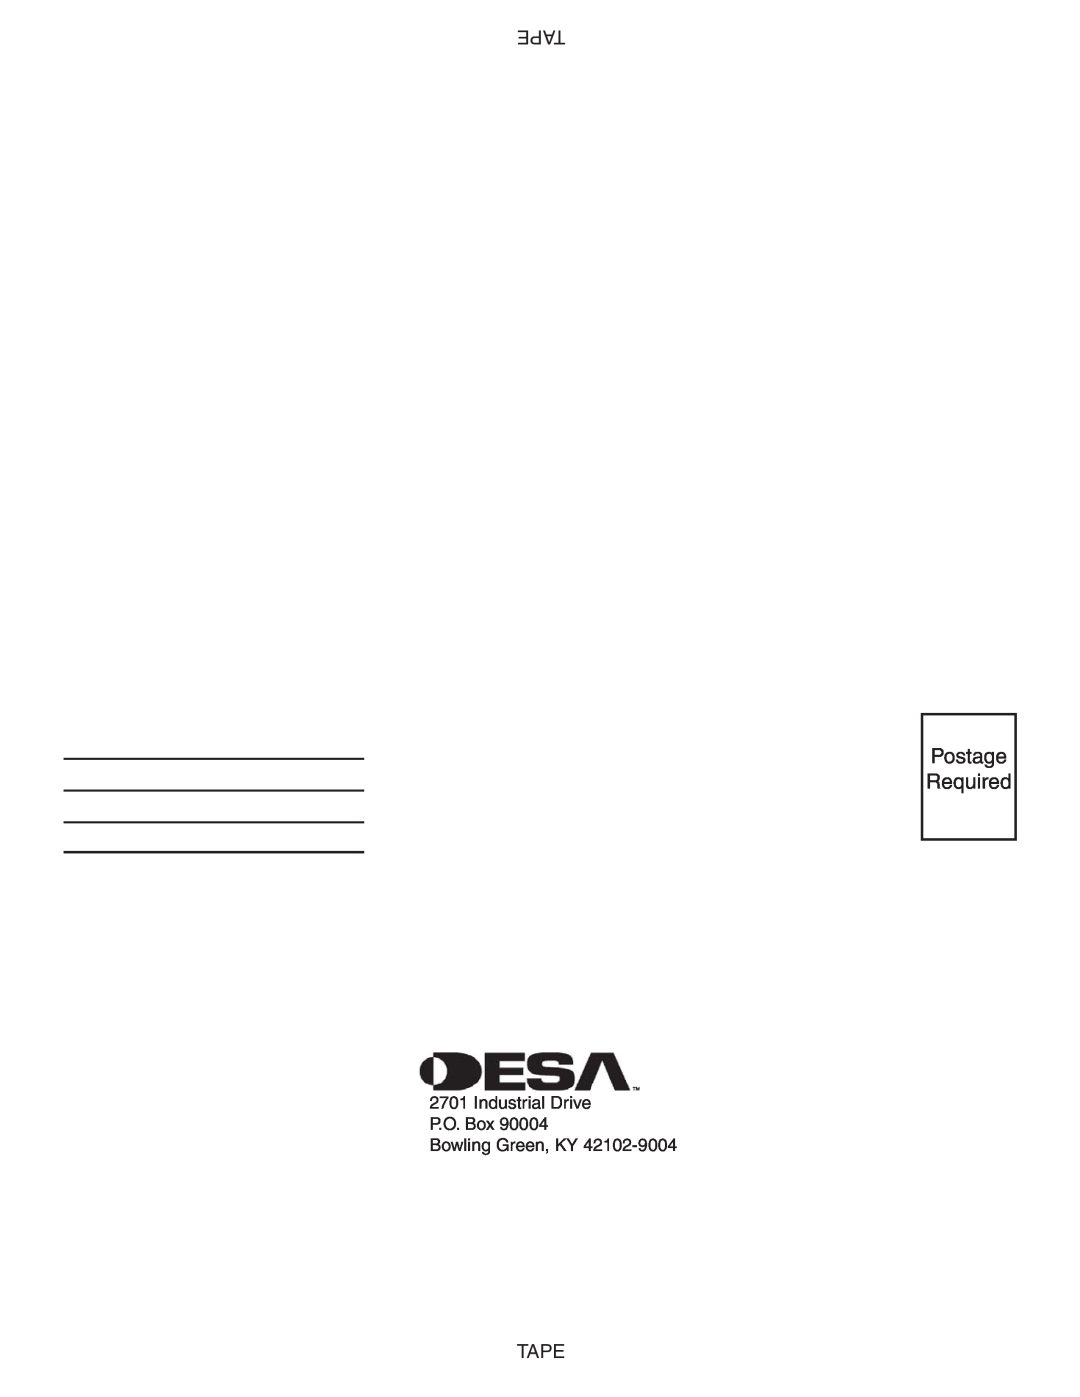 Desa RGA 2-72 installation manual Postage Required, Tape, Industrial Drive P.O. Box Bowling Green, KY, 115043-01 